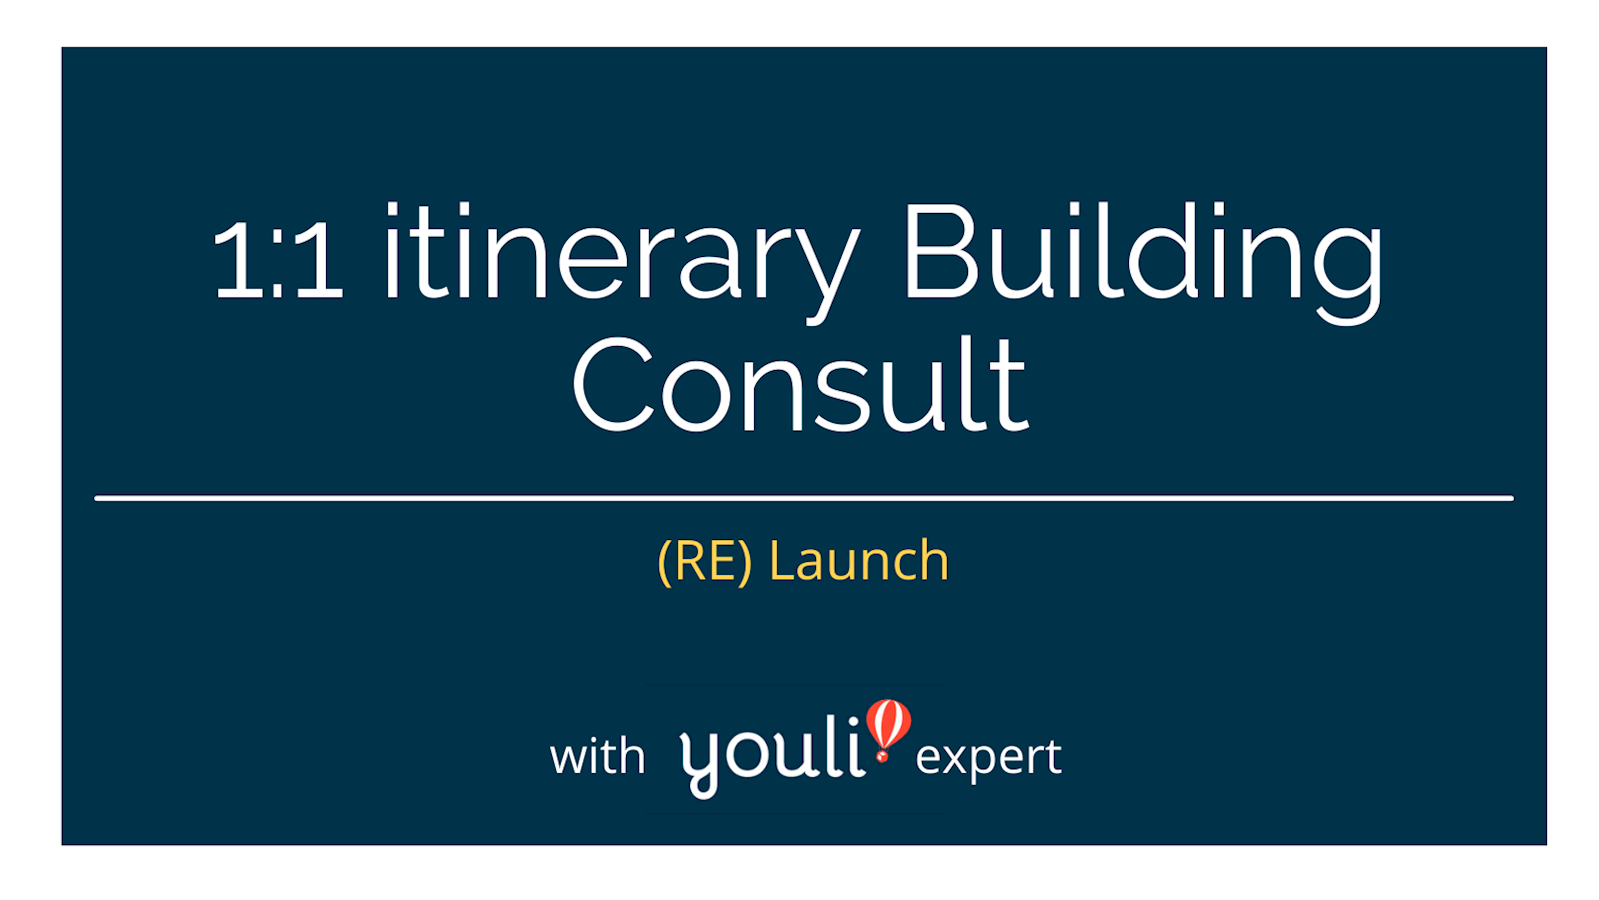 1:1 Itinerary Building Consult with YouLi expert